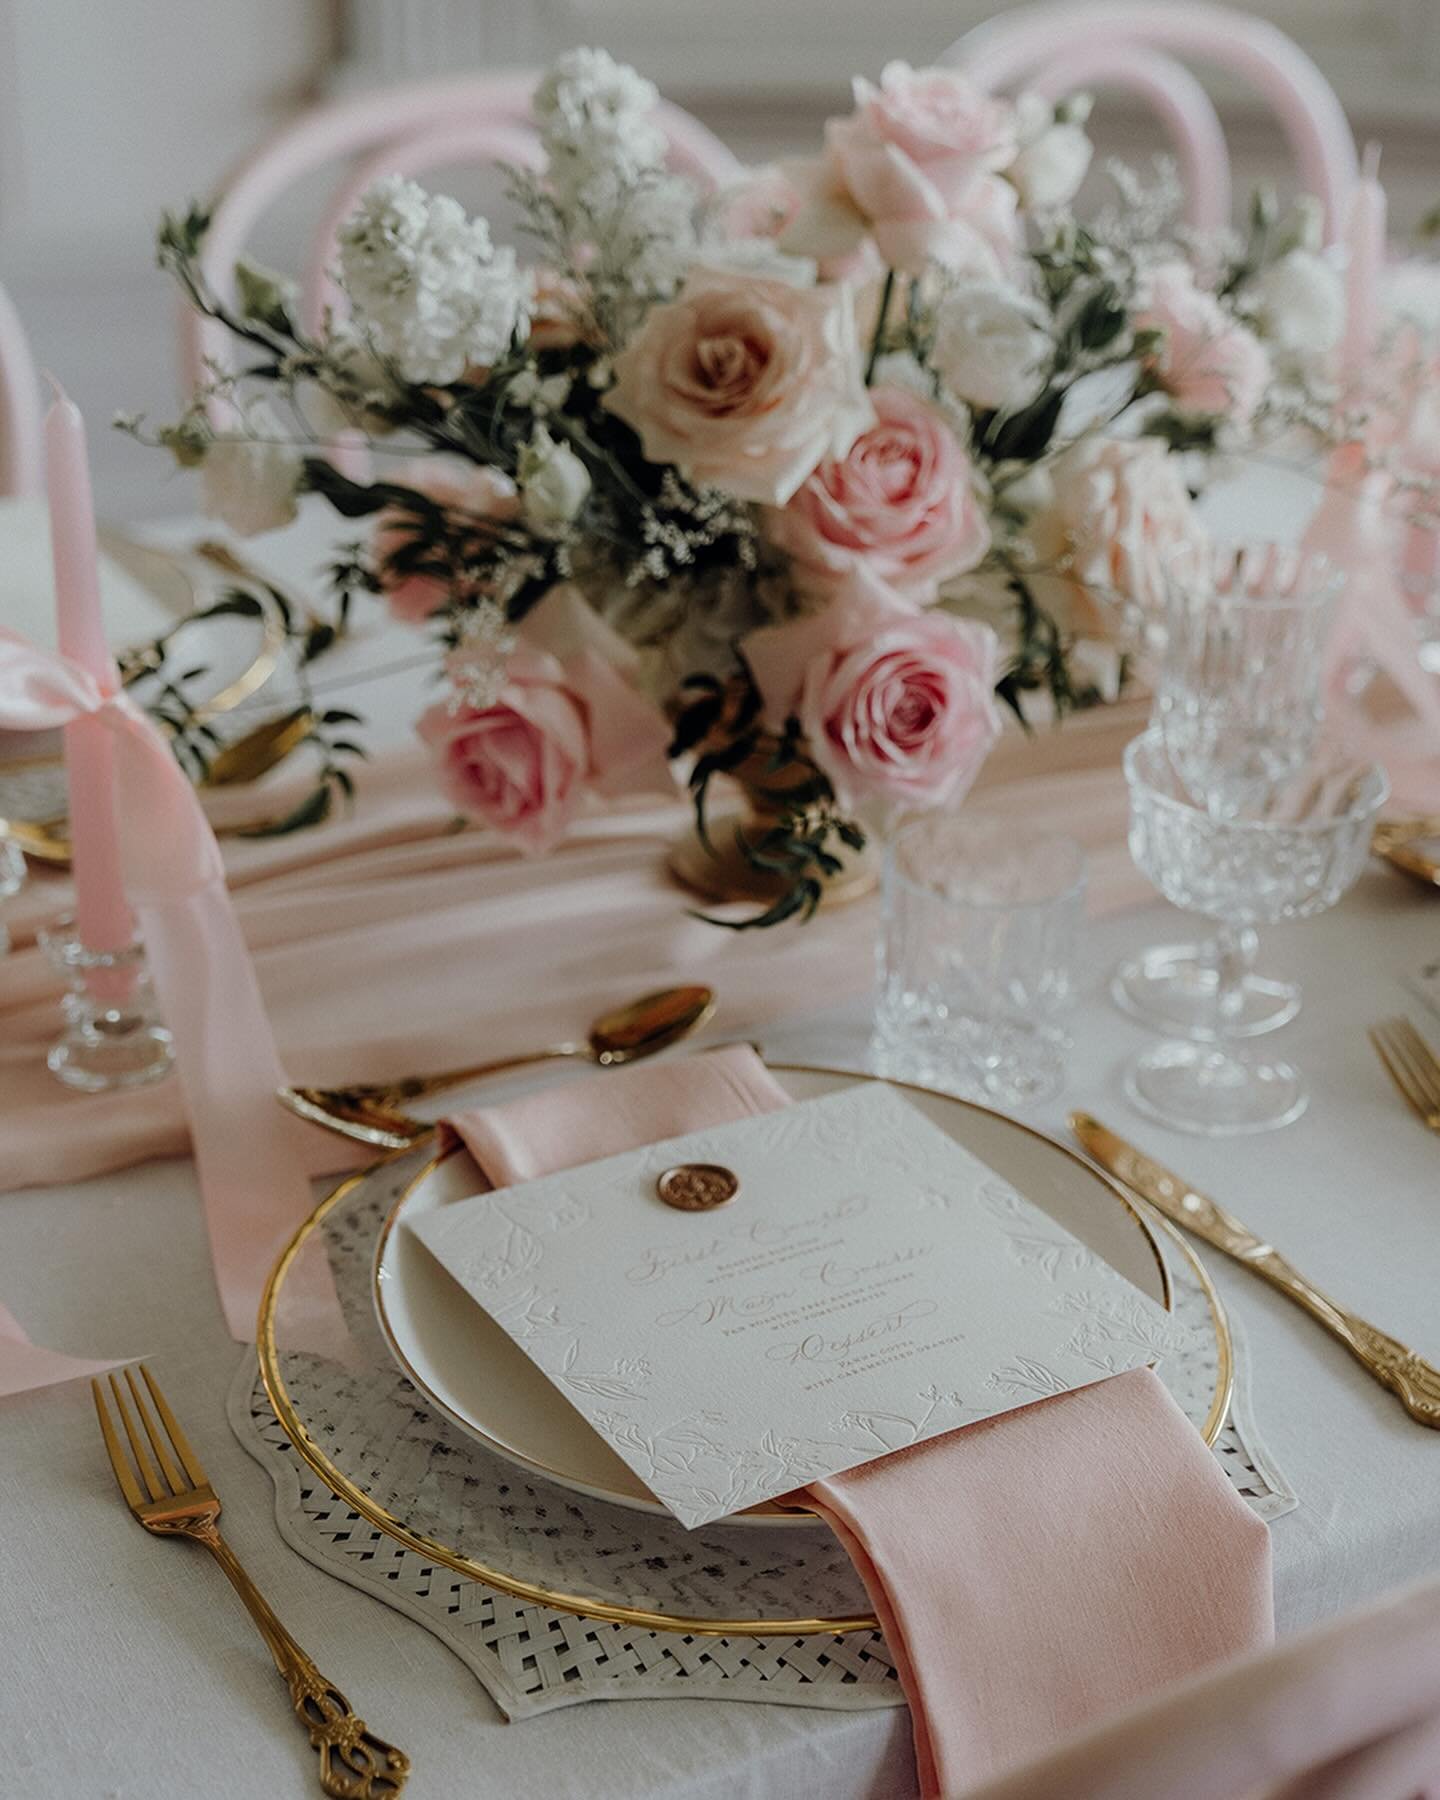 Too pretty for words, slide through the images to see all the gorgeous details 🌸 🎀
~
Photography: Amanda Thomas Photography @amanda_thomas_photography
Florals: VNILLA Events (2x arches, aisle arrangements, plinths/urns and urn arrangements, cake ta